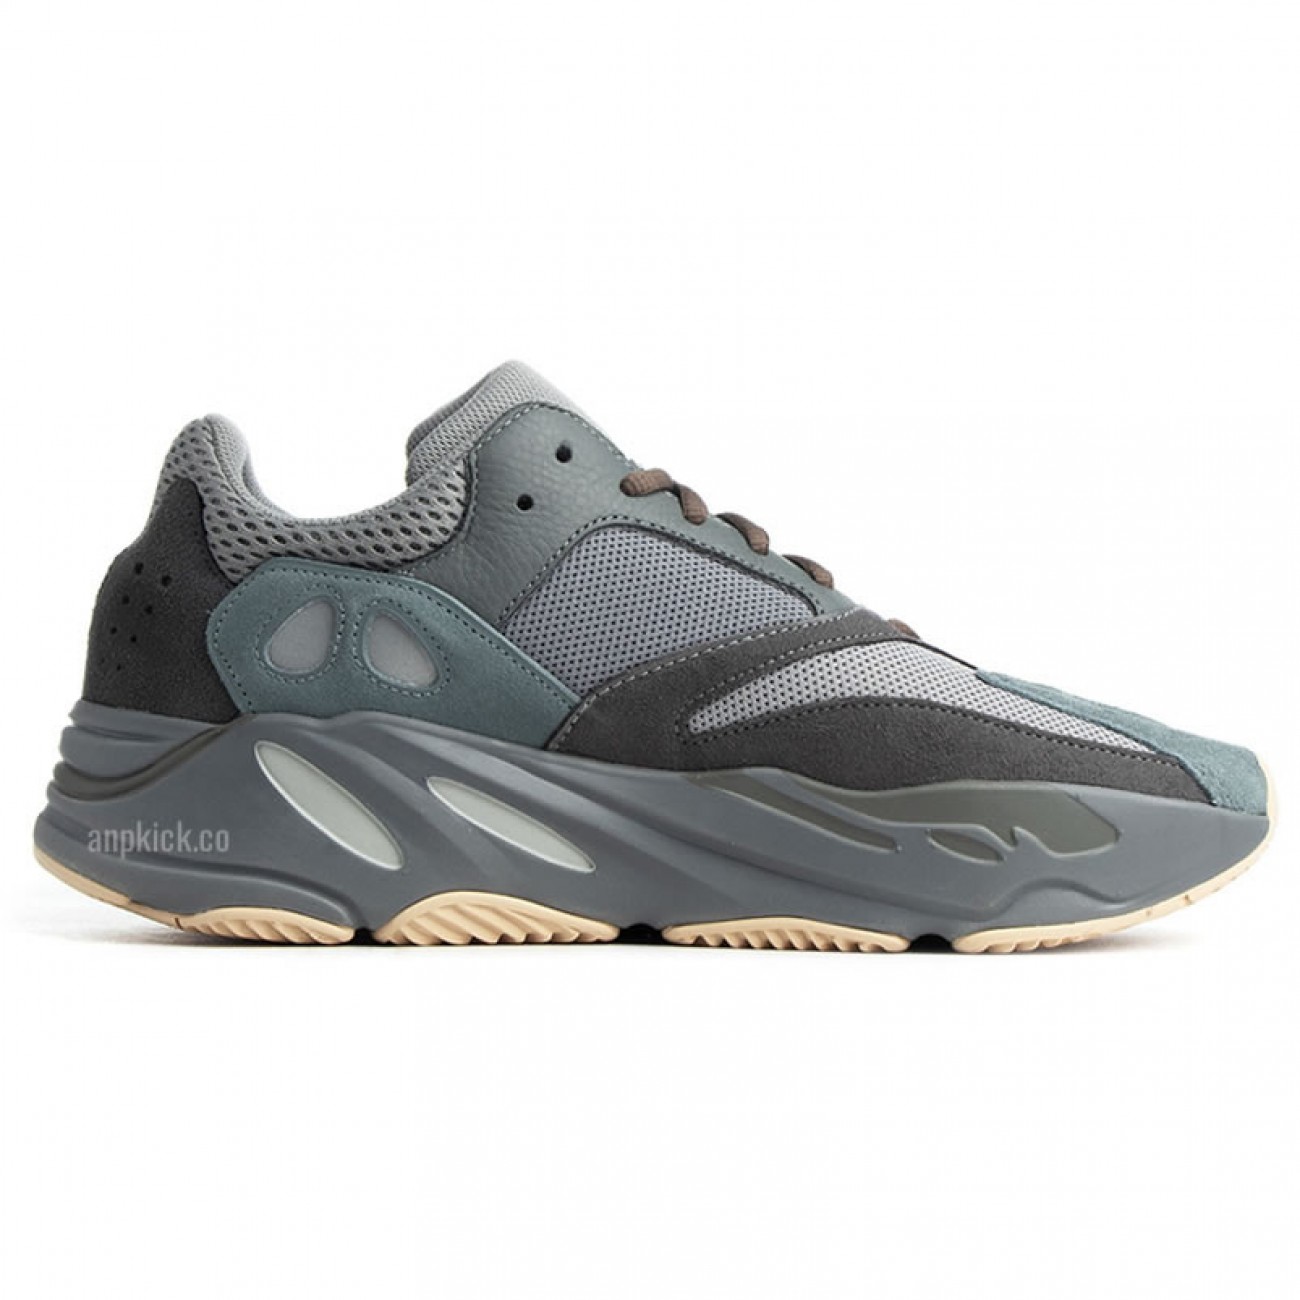 adidas Yeezy Boost 700 "Teal Blue" 2019 Release Date On Feet Outfit FW2499